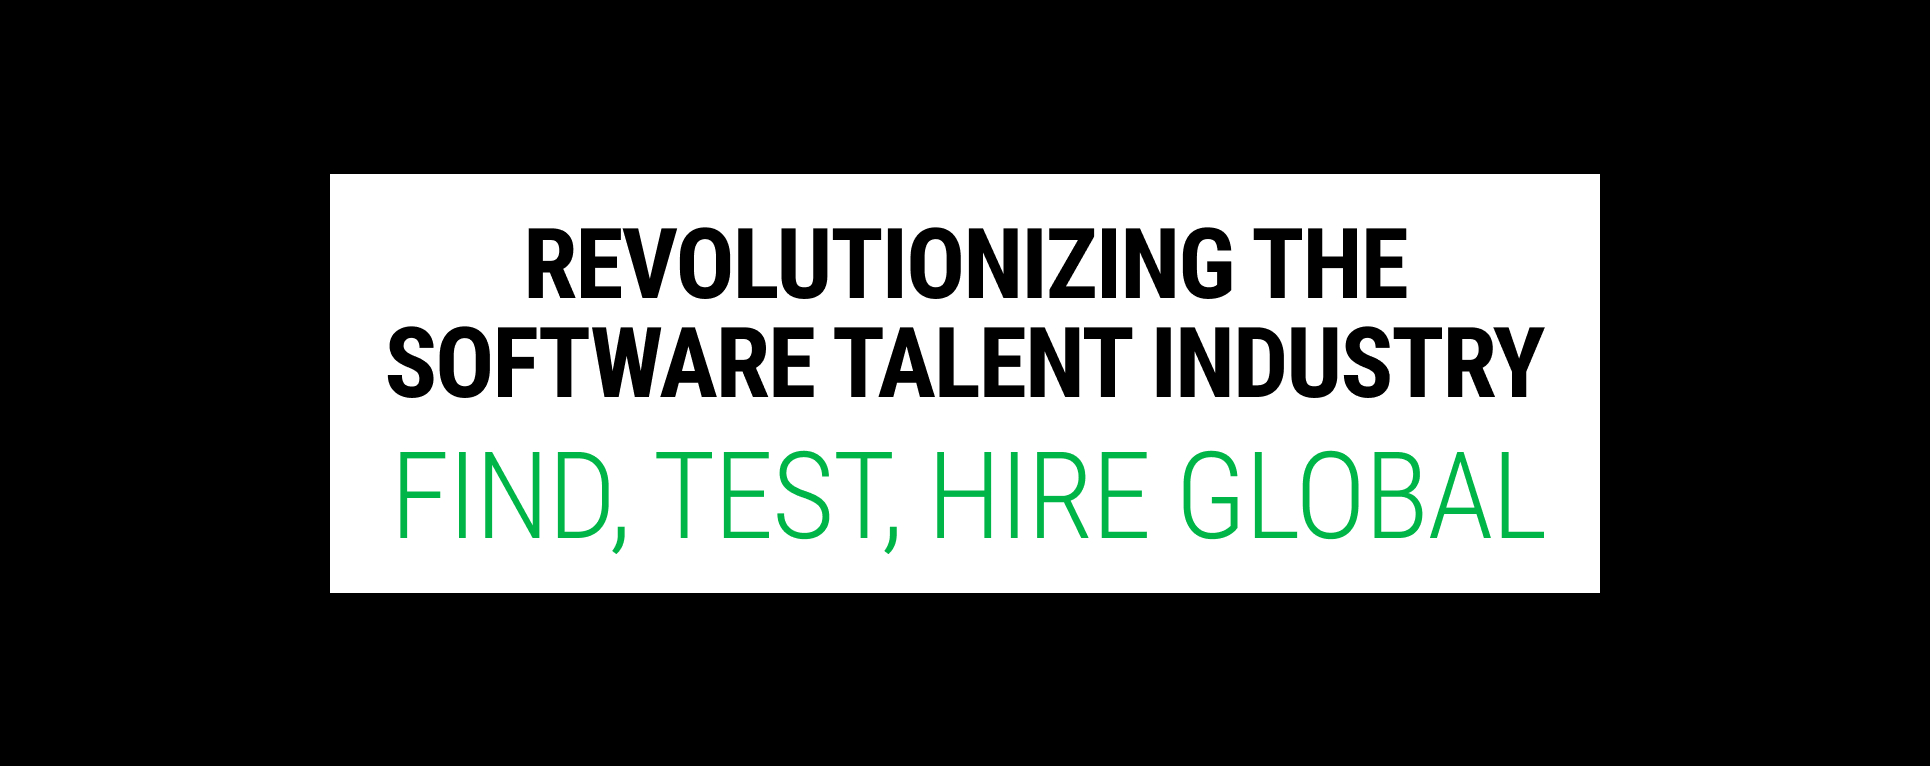 Exceptionly Revolutionizing The Software Talent Industry